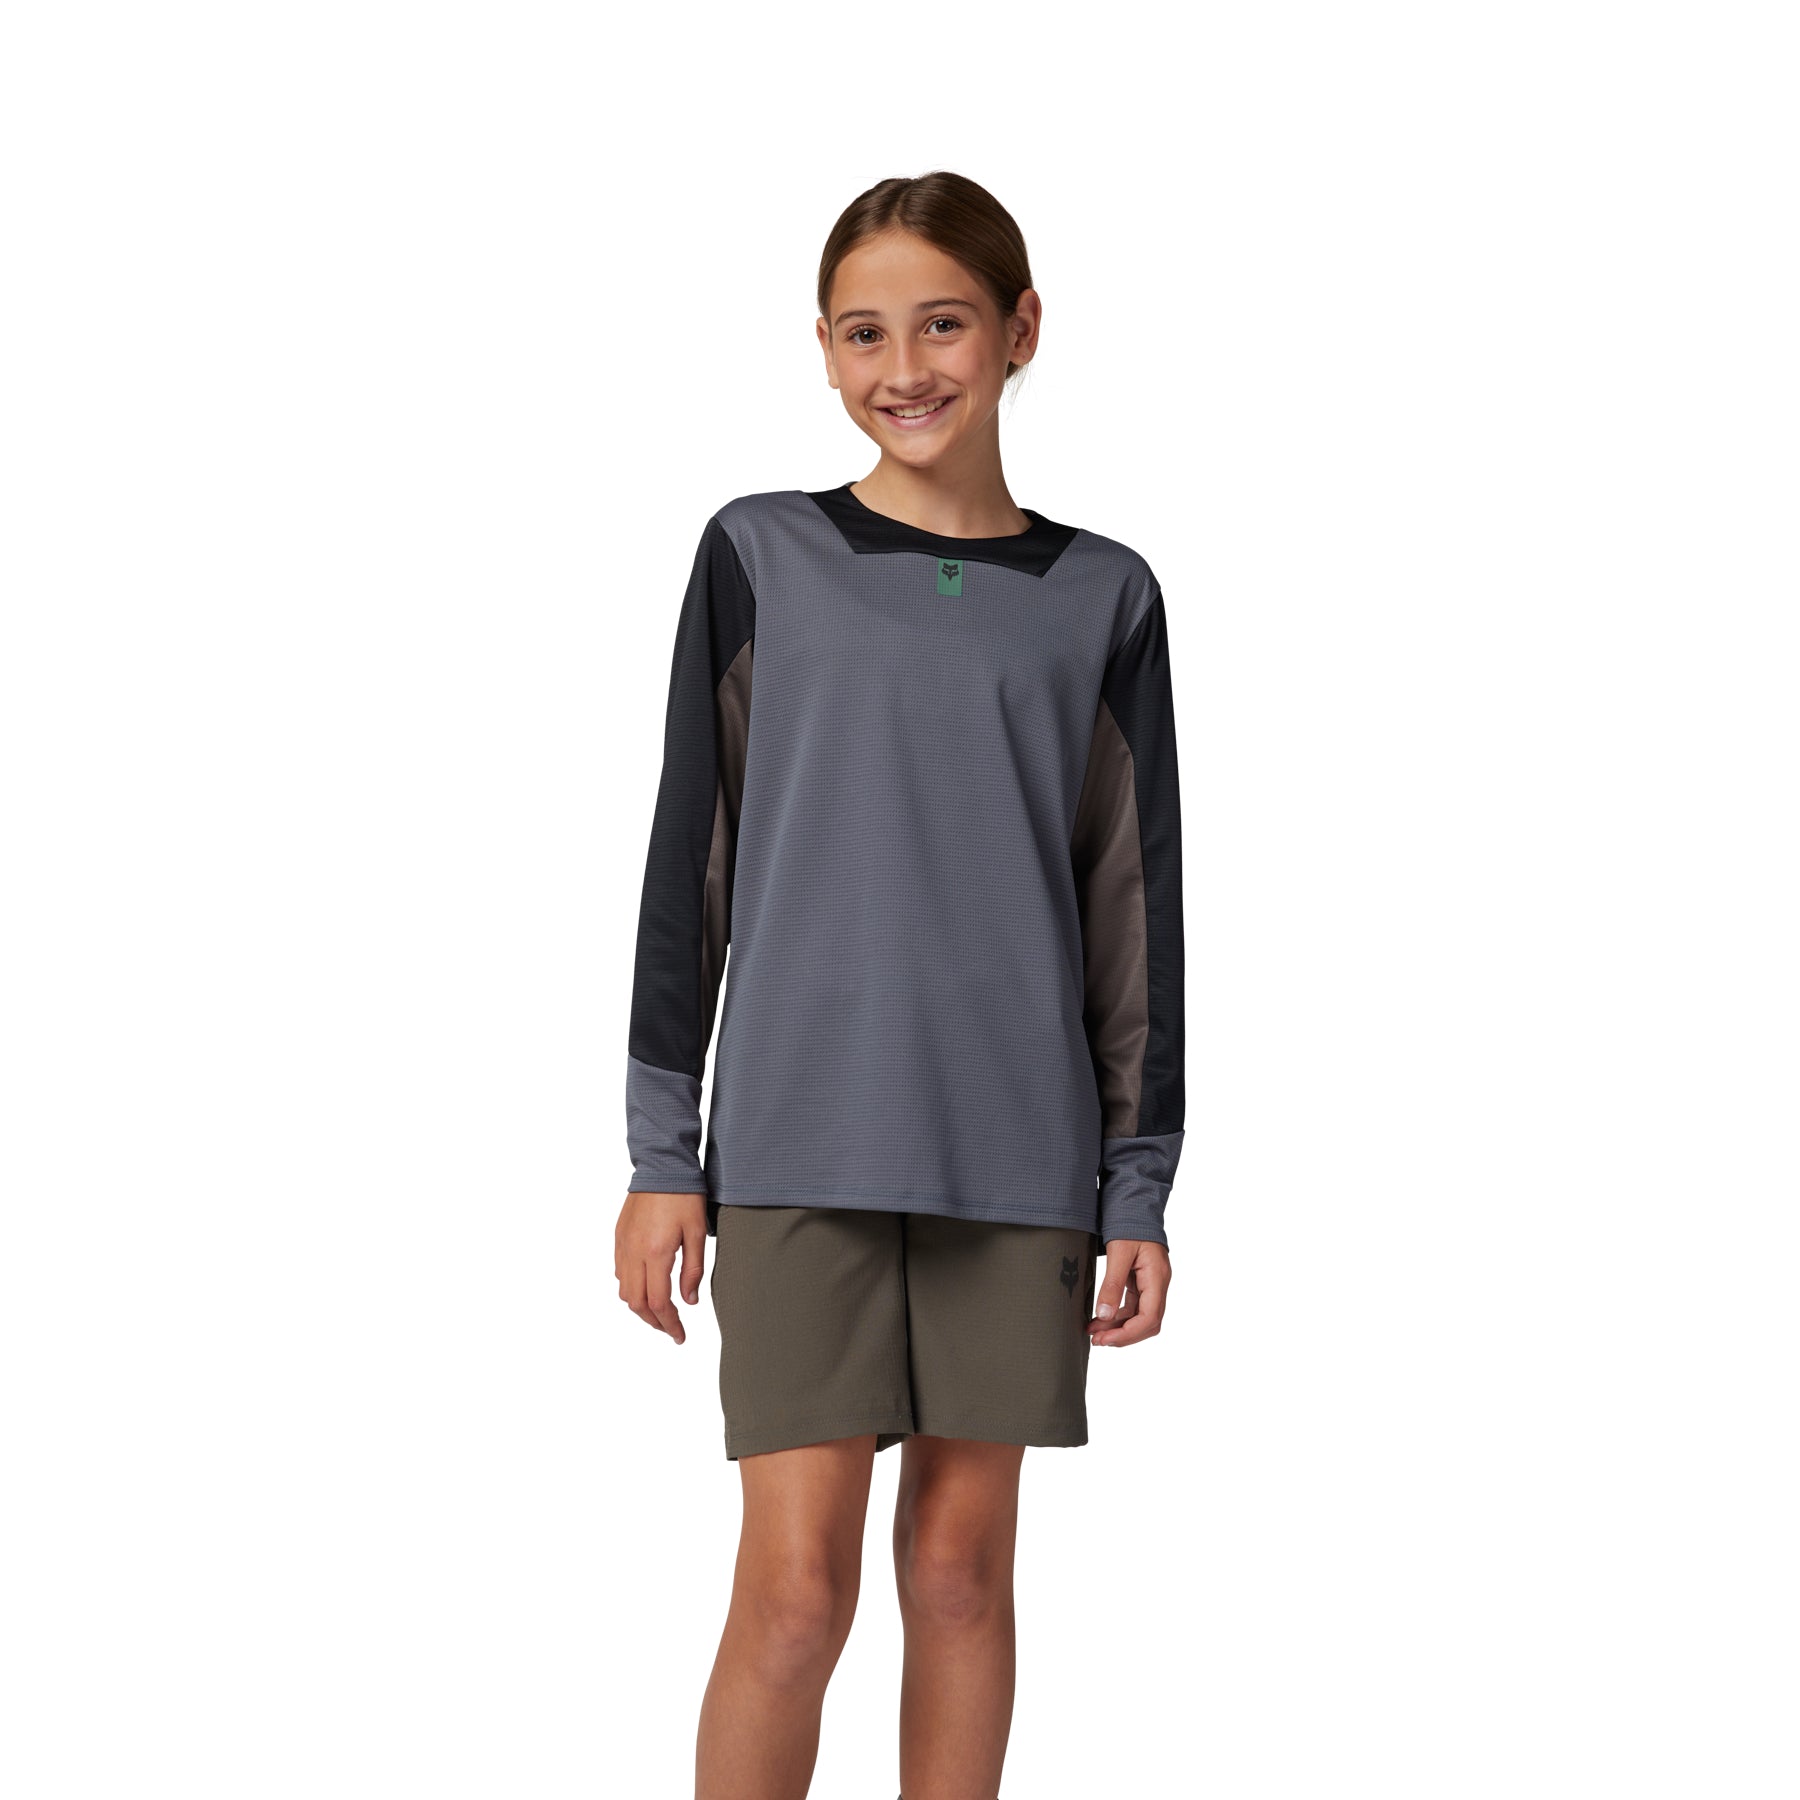 Fox Defend Youth Long Sleeve Jersey - Youth L - Graphite - Image 1